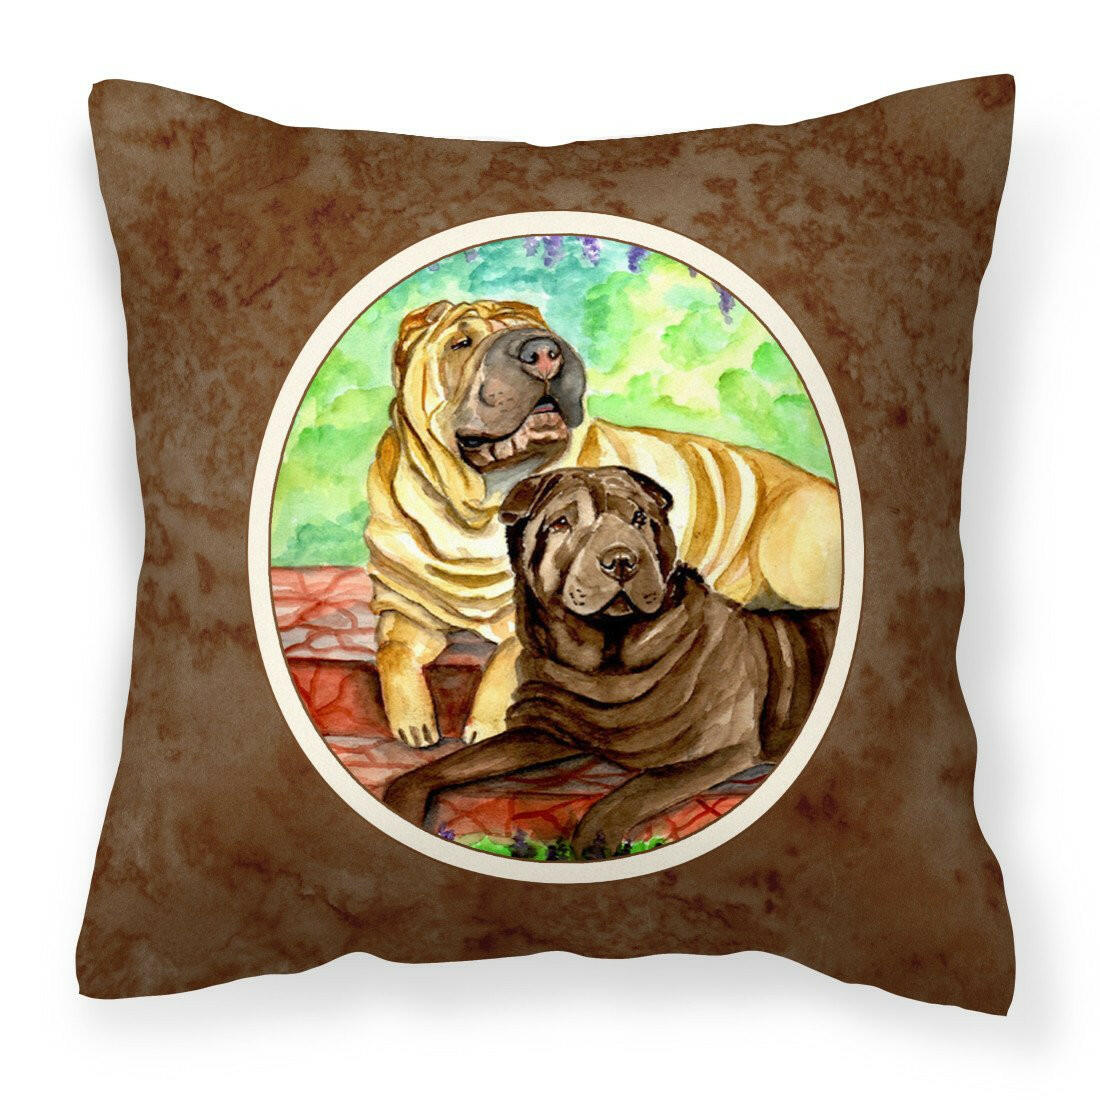 Shar Pei Fawn and Chocolate Fabric Decorative Pillow 7070PW1414 - the-store.com